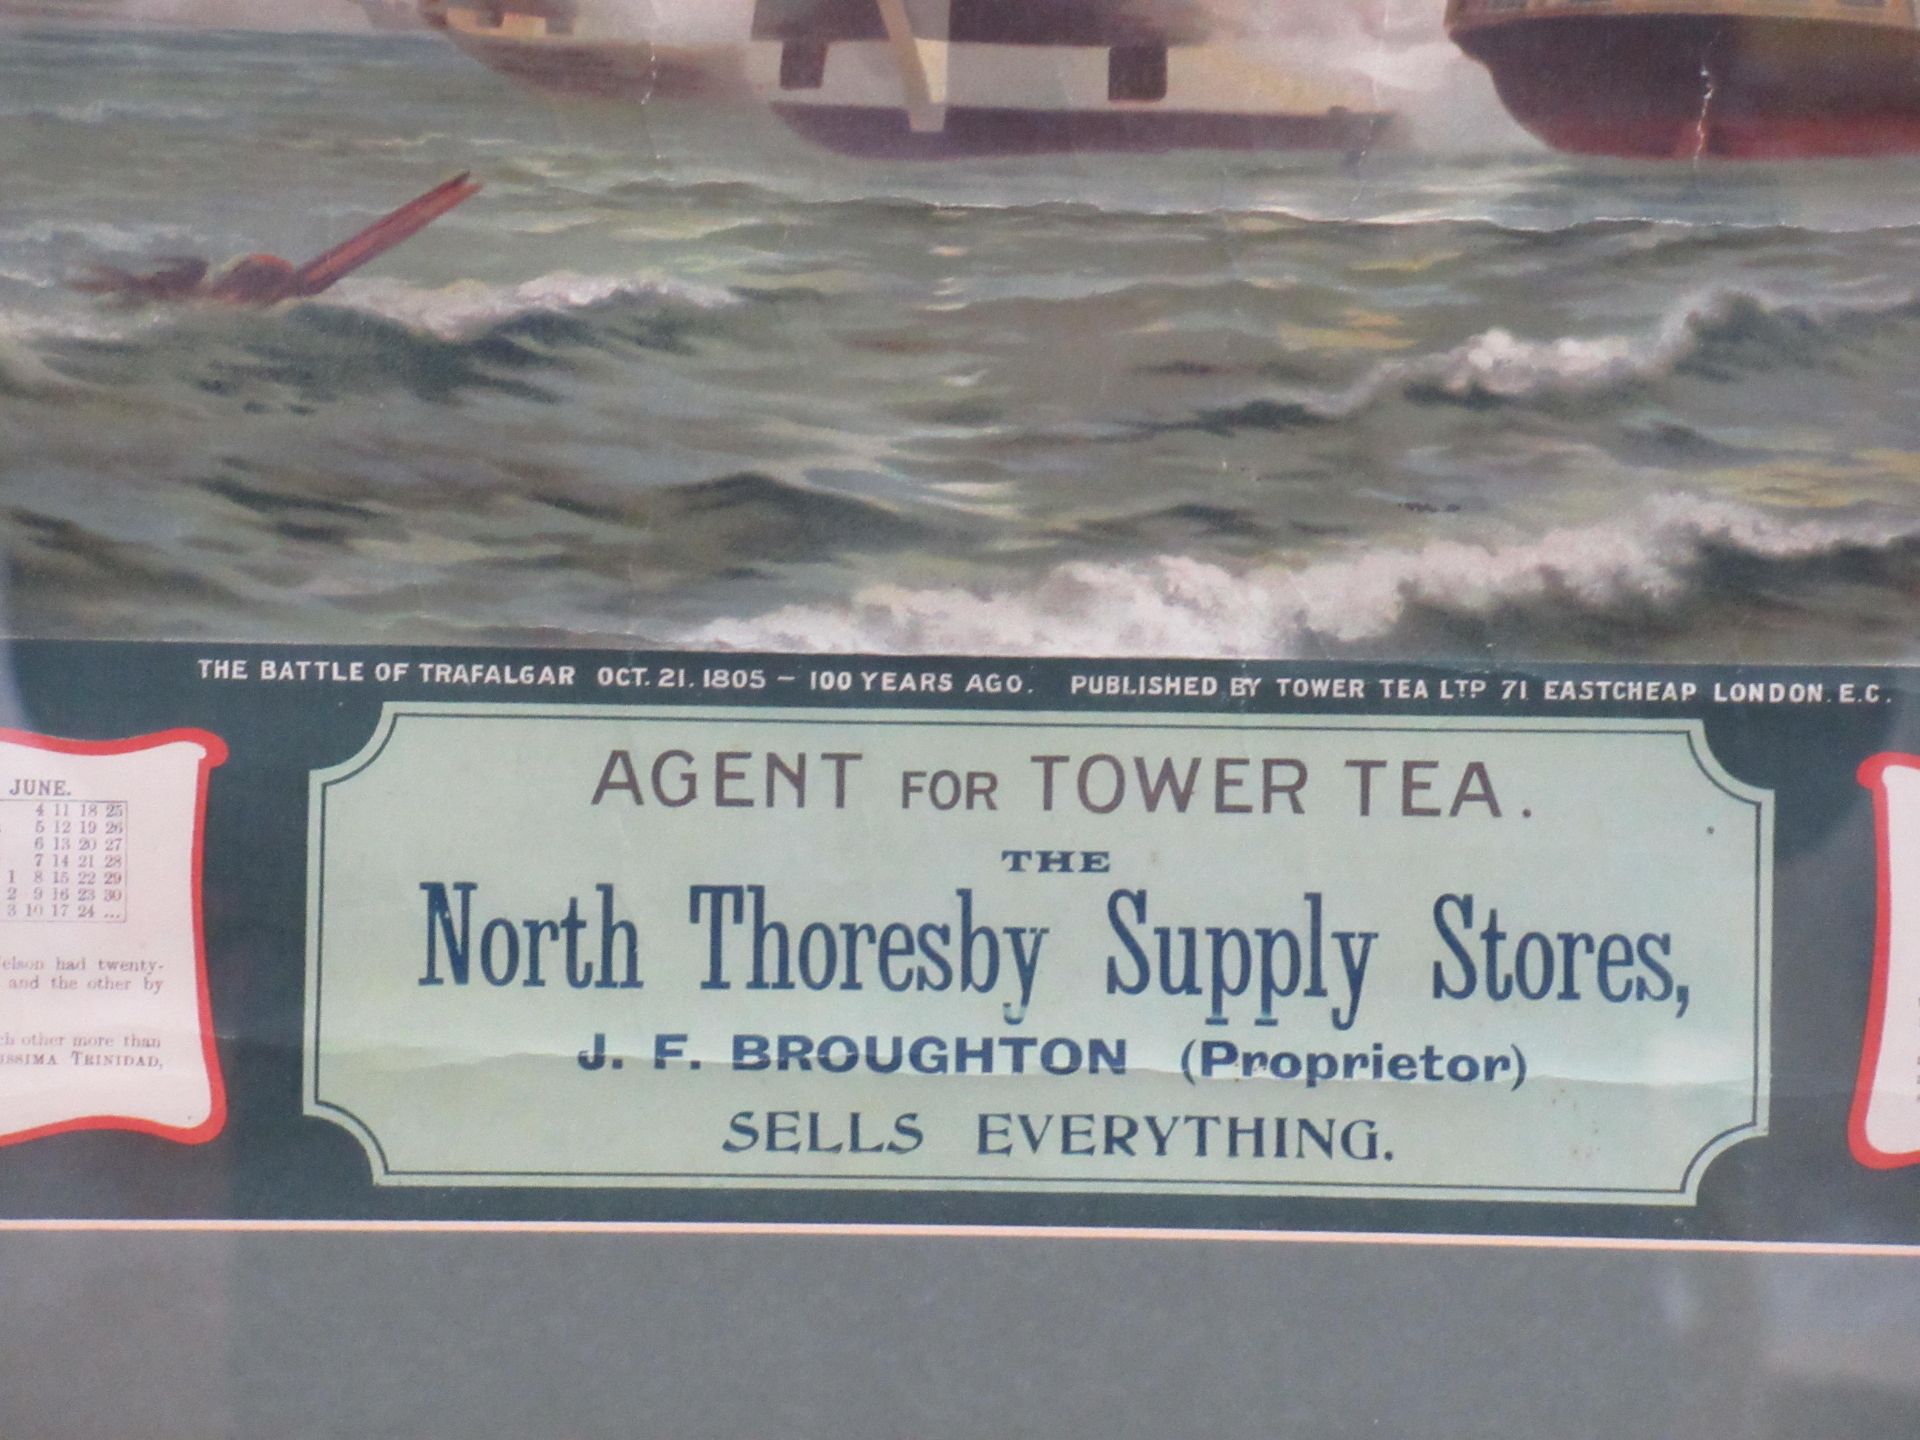 North Thorsby Supply Stores, J.F. Broughton 'The Battle of Trafalgar Oct 21 1805' 1905 calendar in f - Image 3 of 5